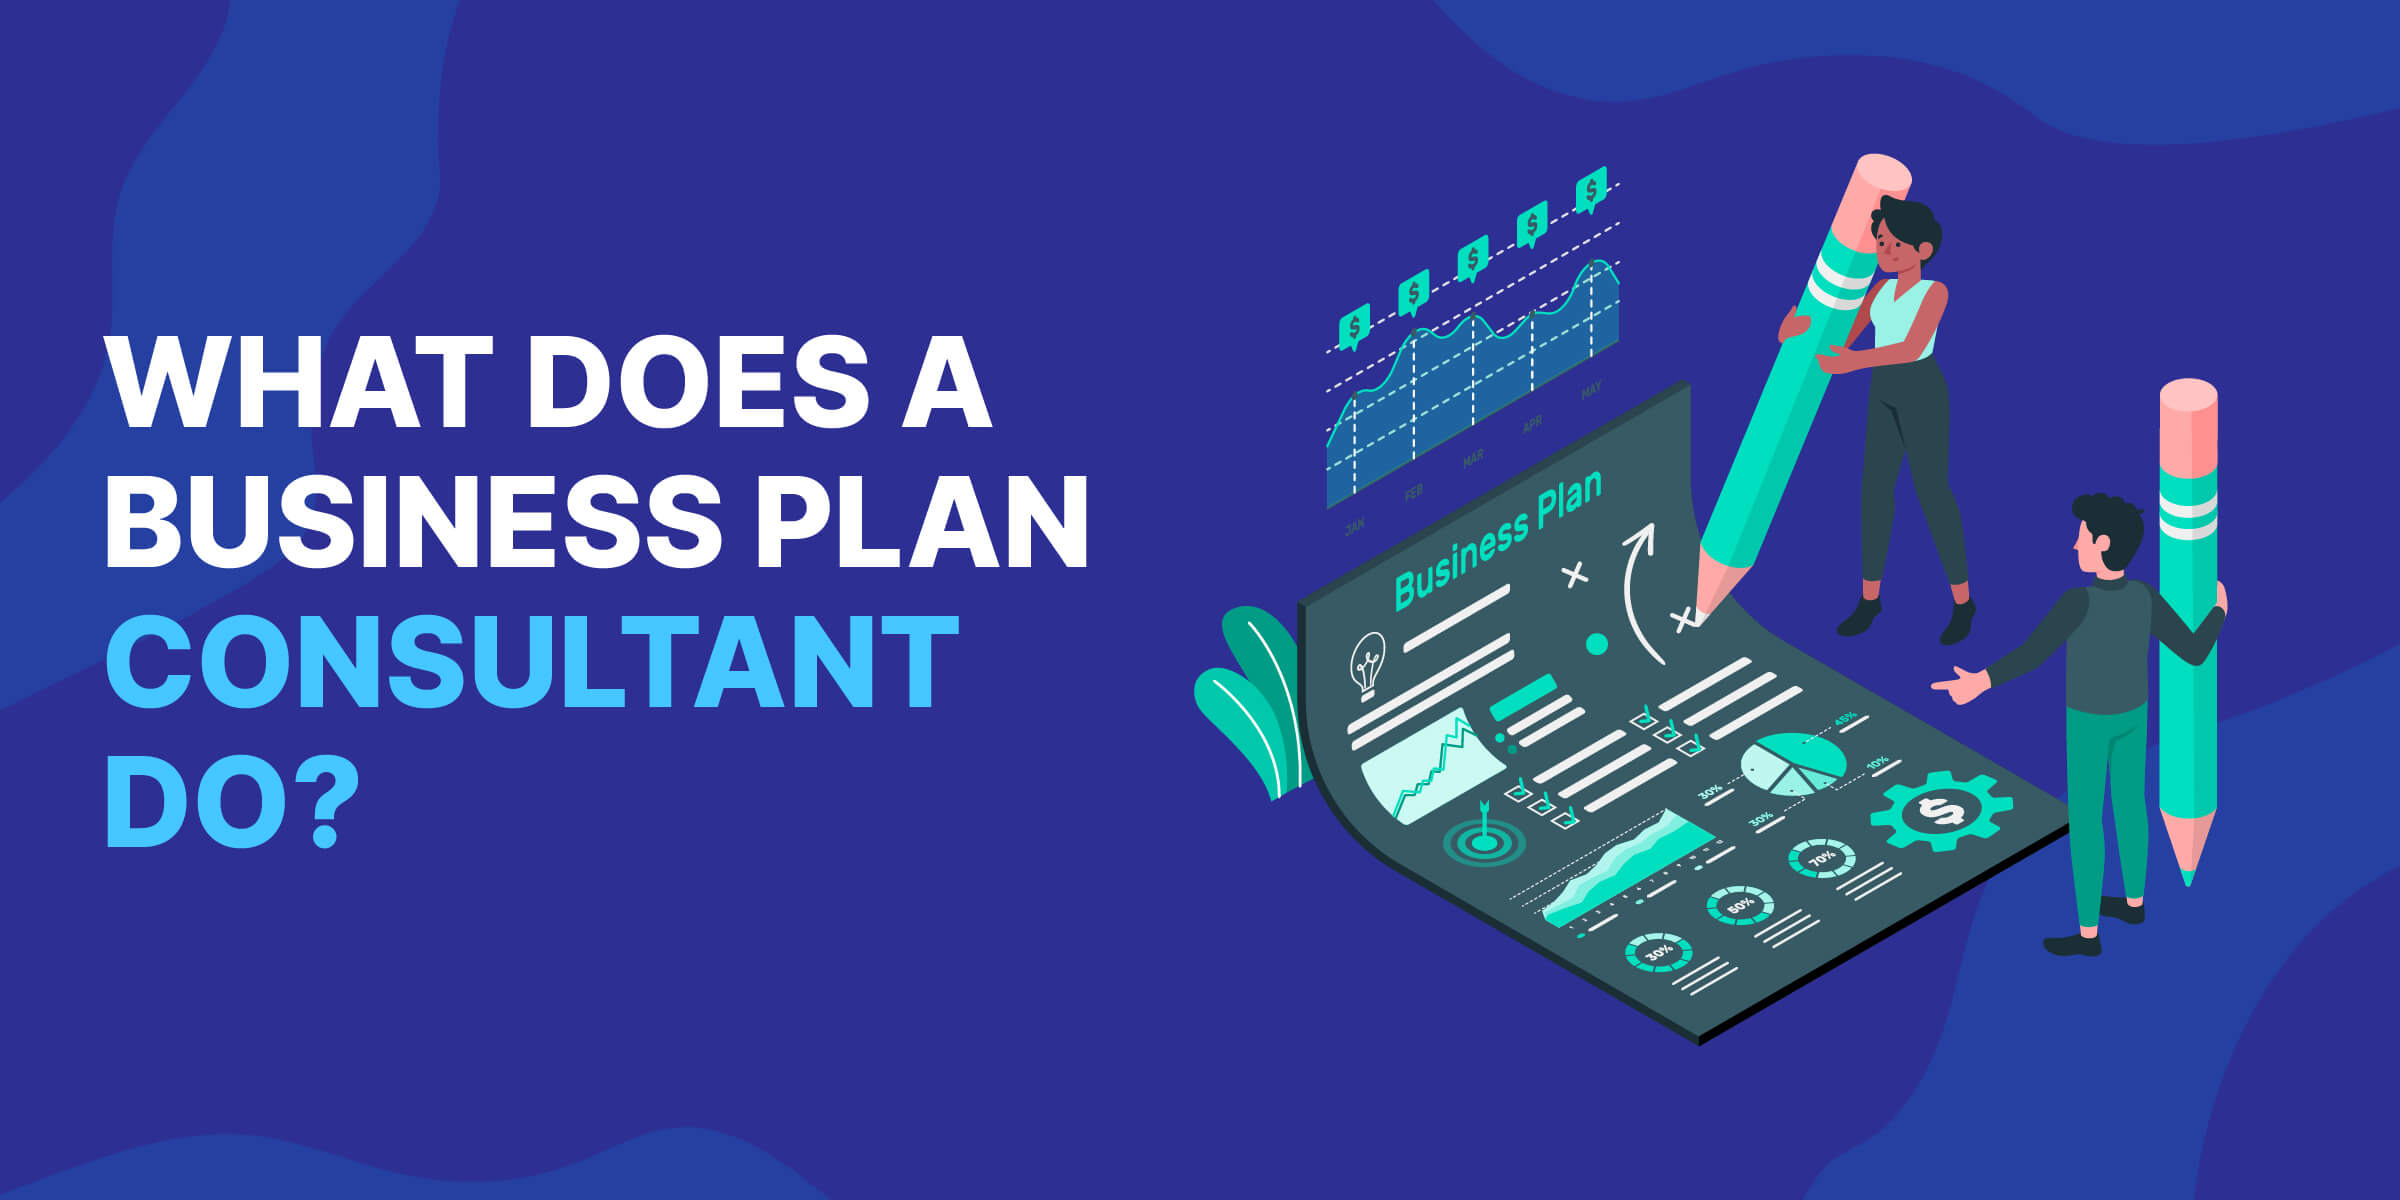 What Does a Business Plan Consultant Do